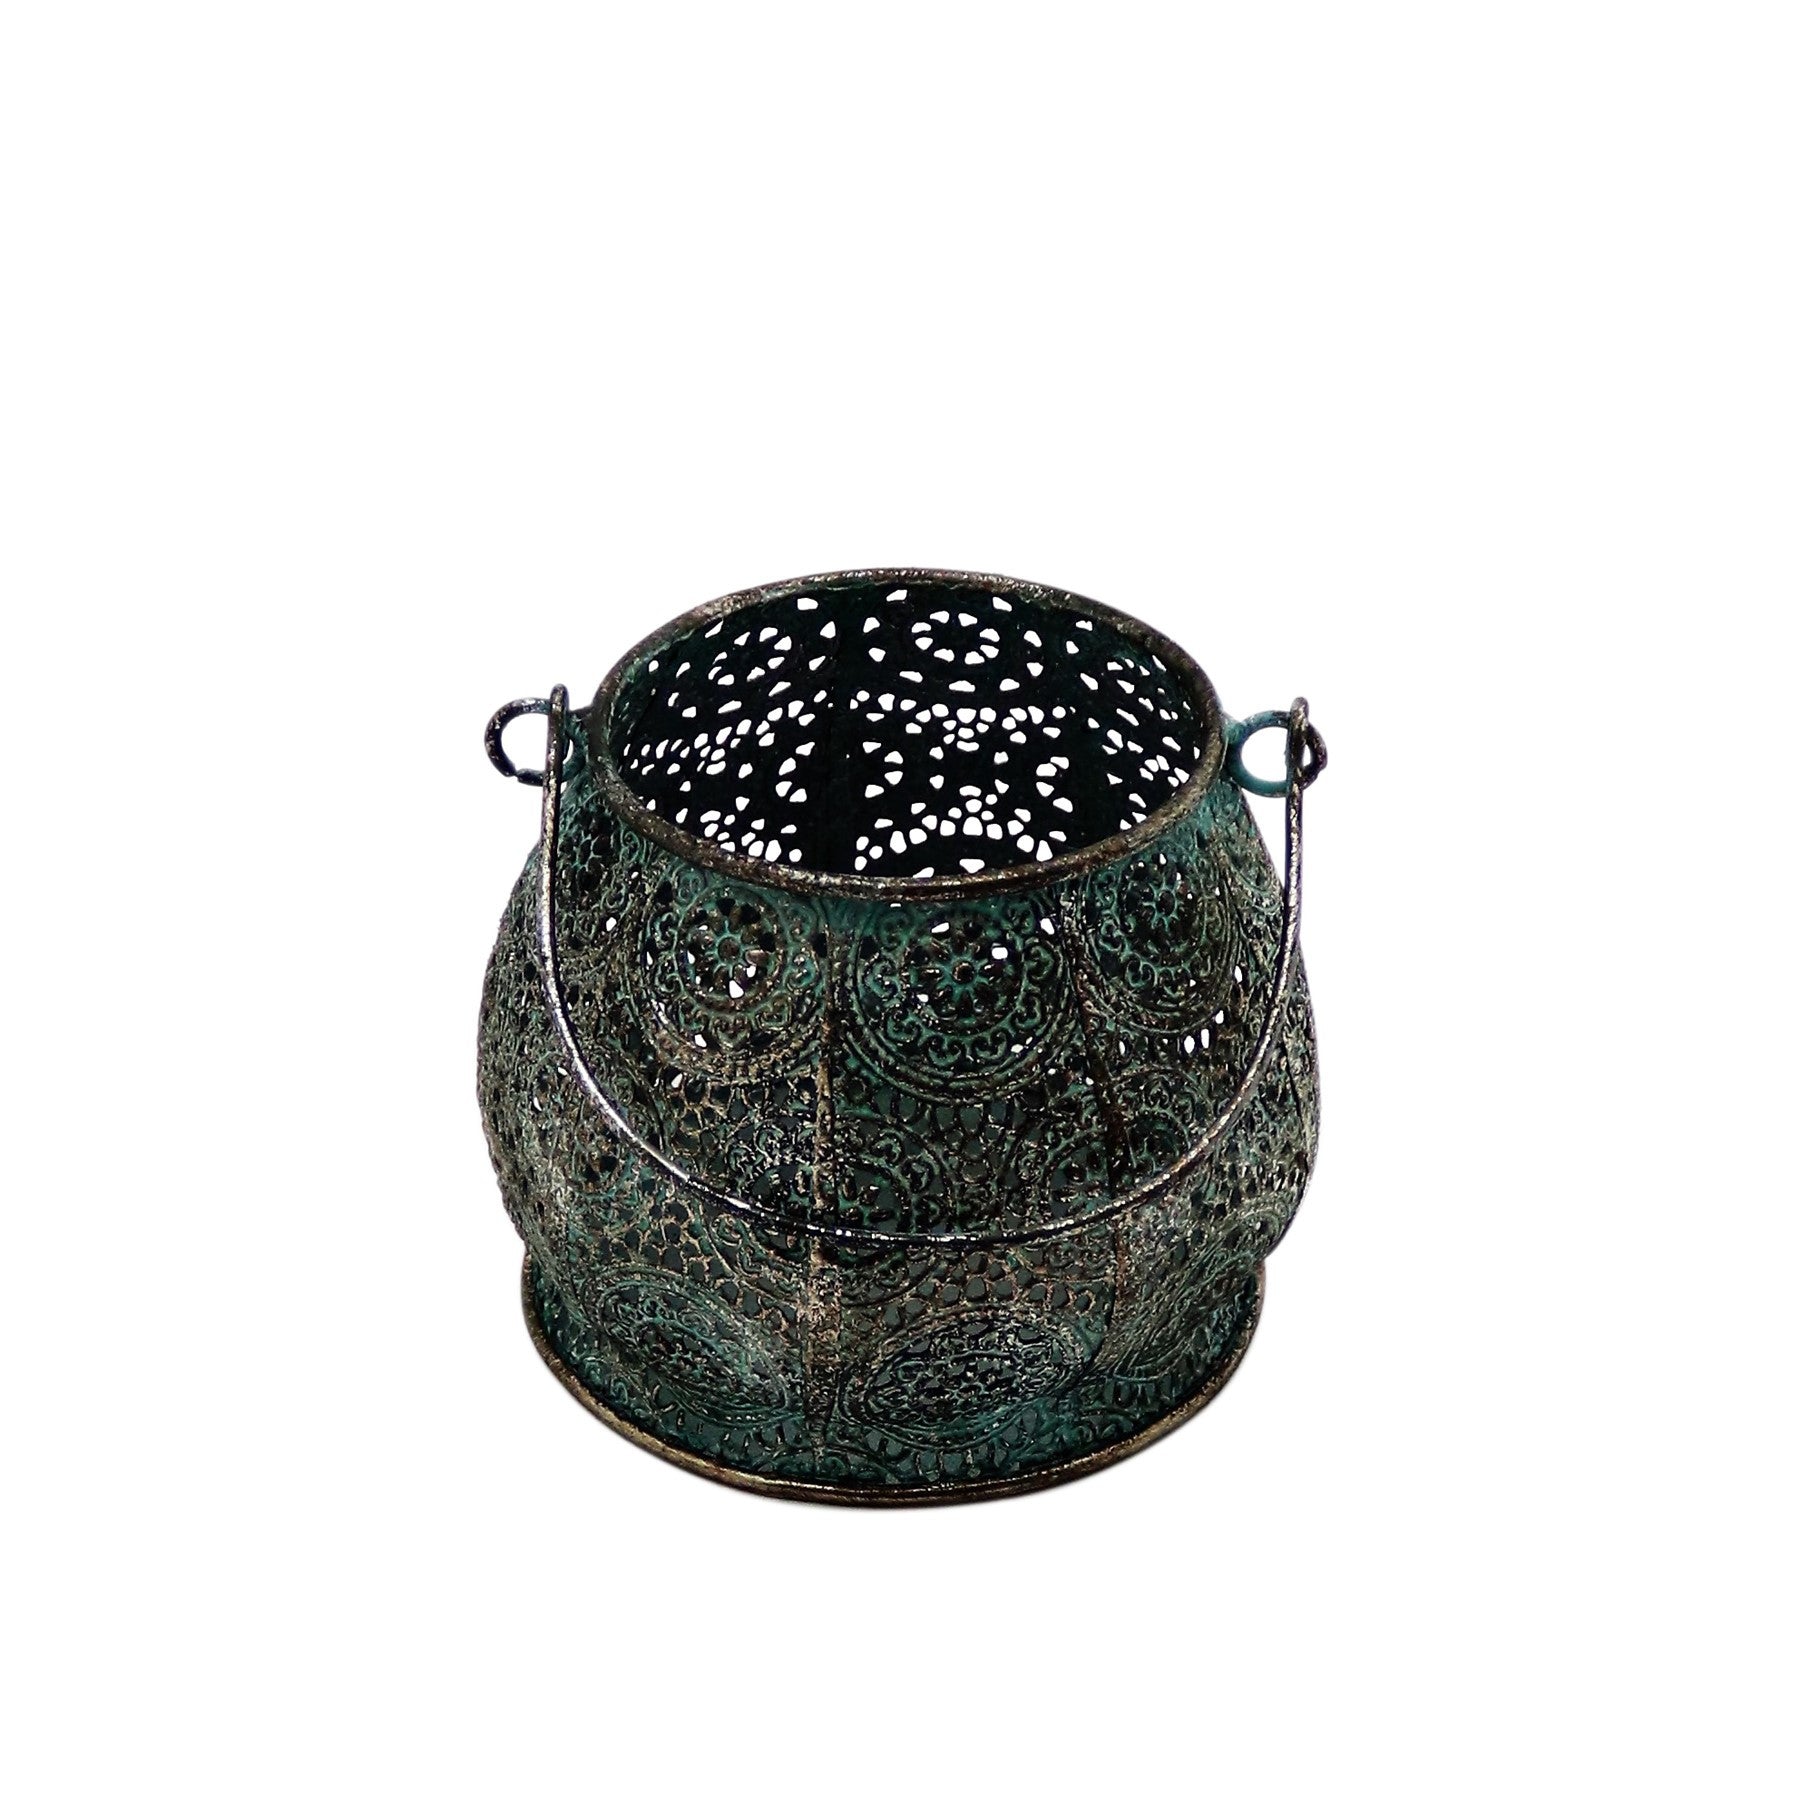 View Marrakesh Candleholder with Handle 14cm information